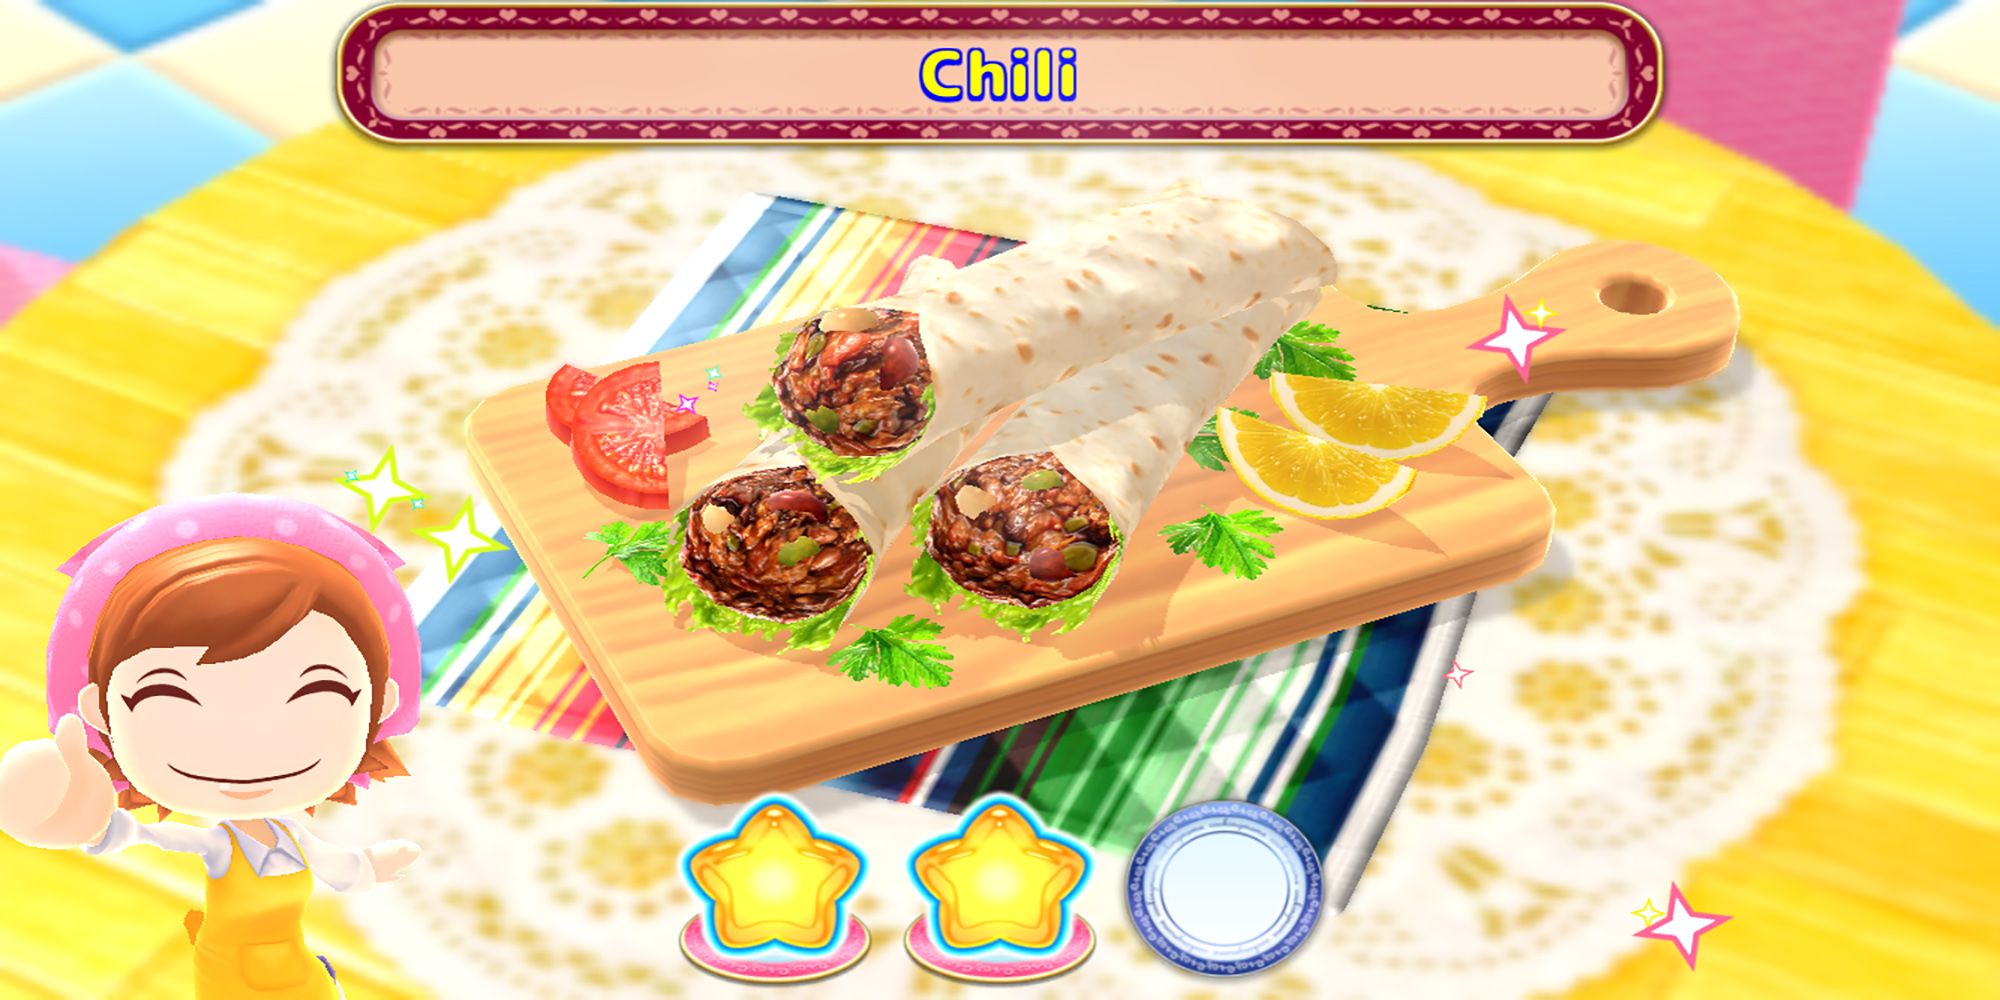 Cooking Mama gives your chili wraps a thumbs up in Cooking Mama: Cuisine!